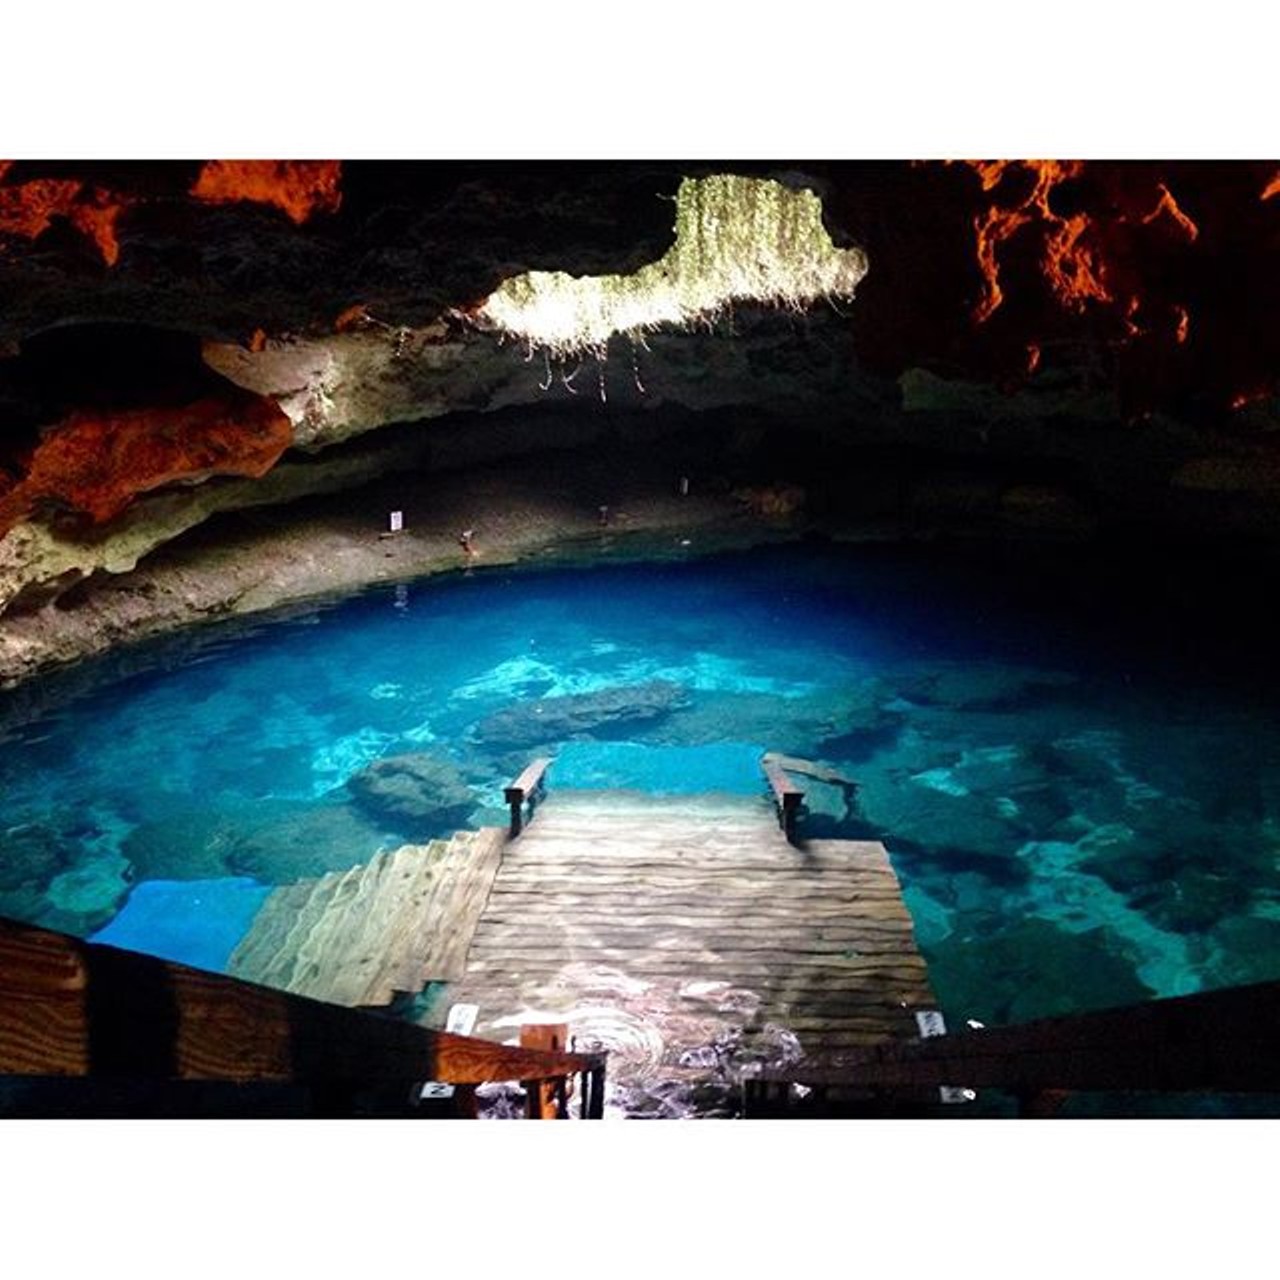 Devil&#146;s Den Underground Grotto
5390 NE 180th Ave, Williston
Devil's Den is one of Florida's oldest tourist traps. Take a deep breath and enter the cave that plays host to an underground spring, where you can snorkel and scuba dive. 
Photo via gypsealaysea on Instagram